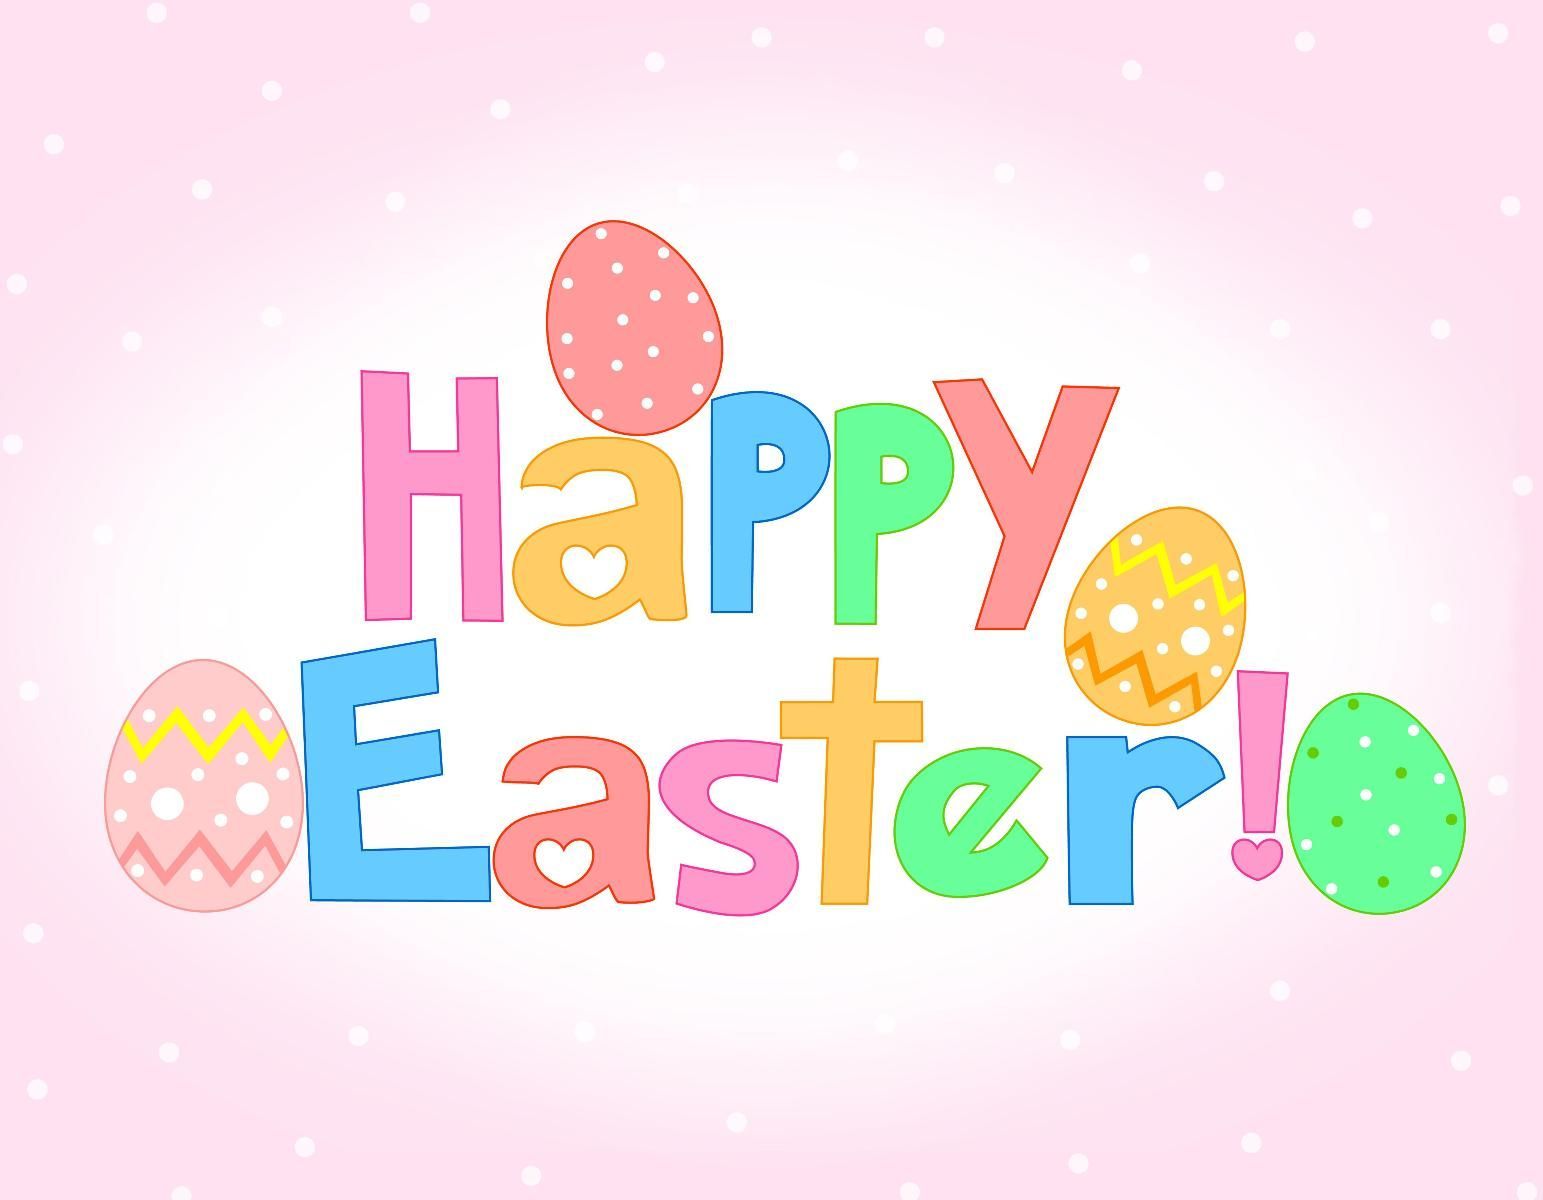 Happy Easter Image 2019: Easter Picture Photo HD